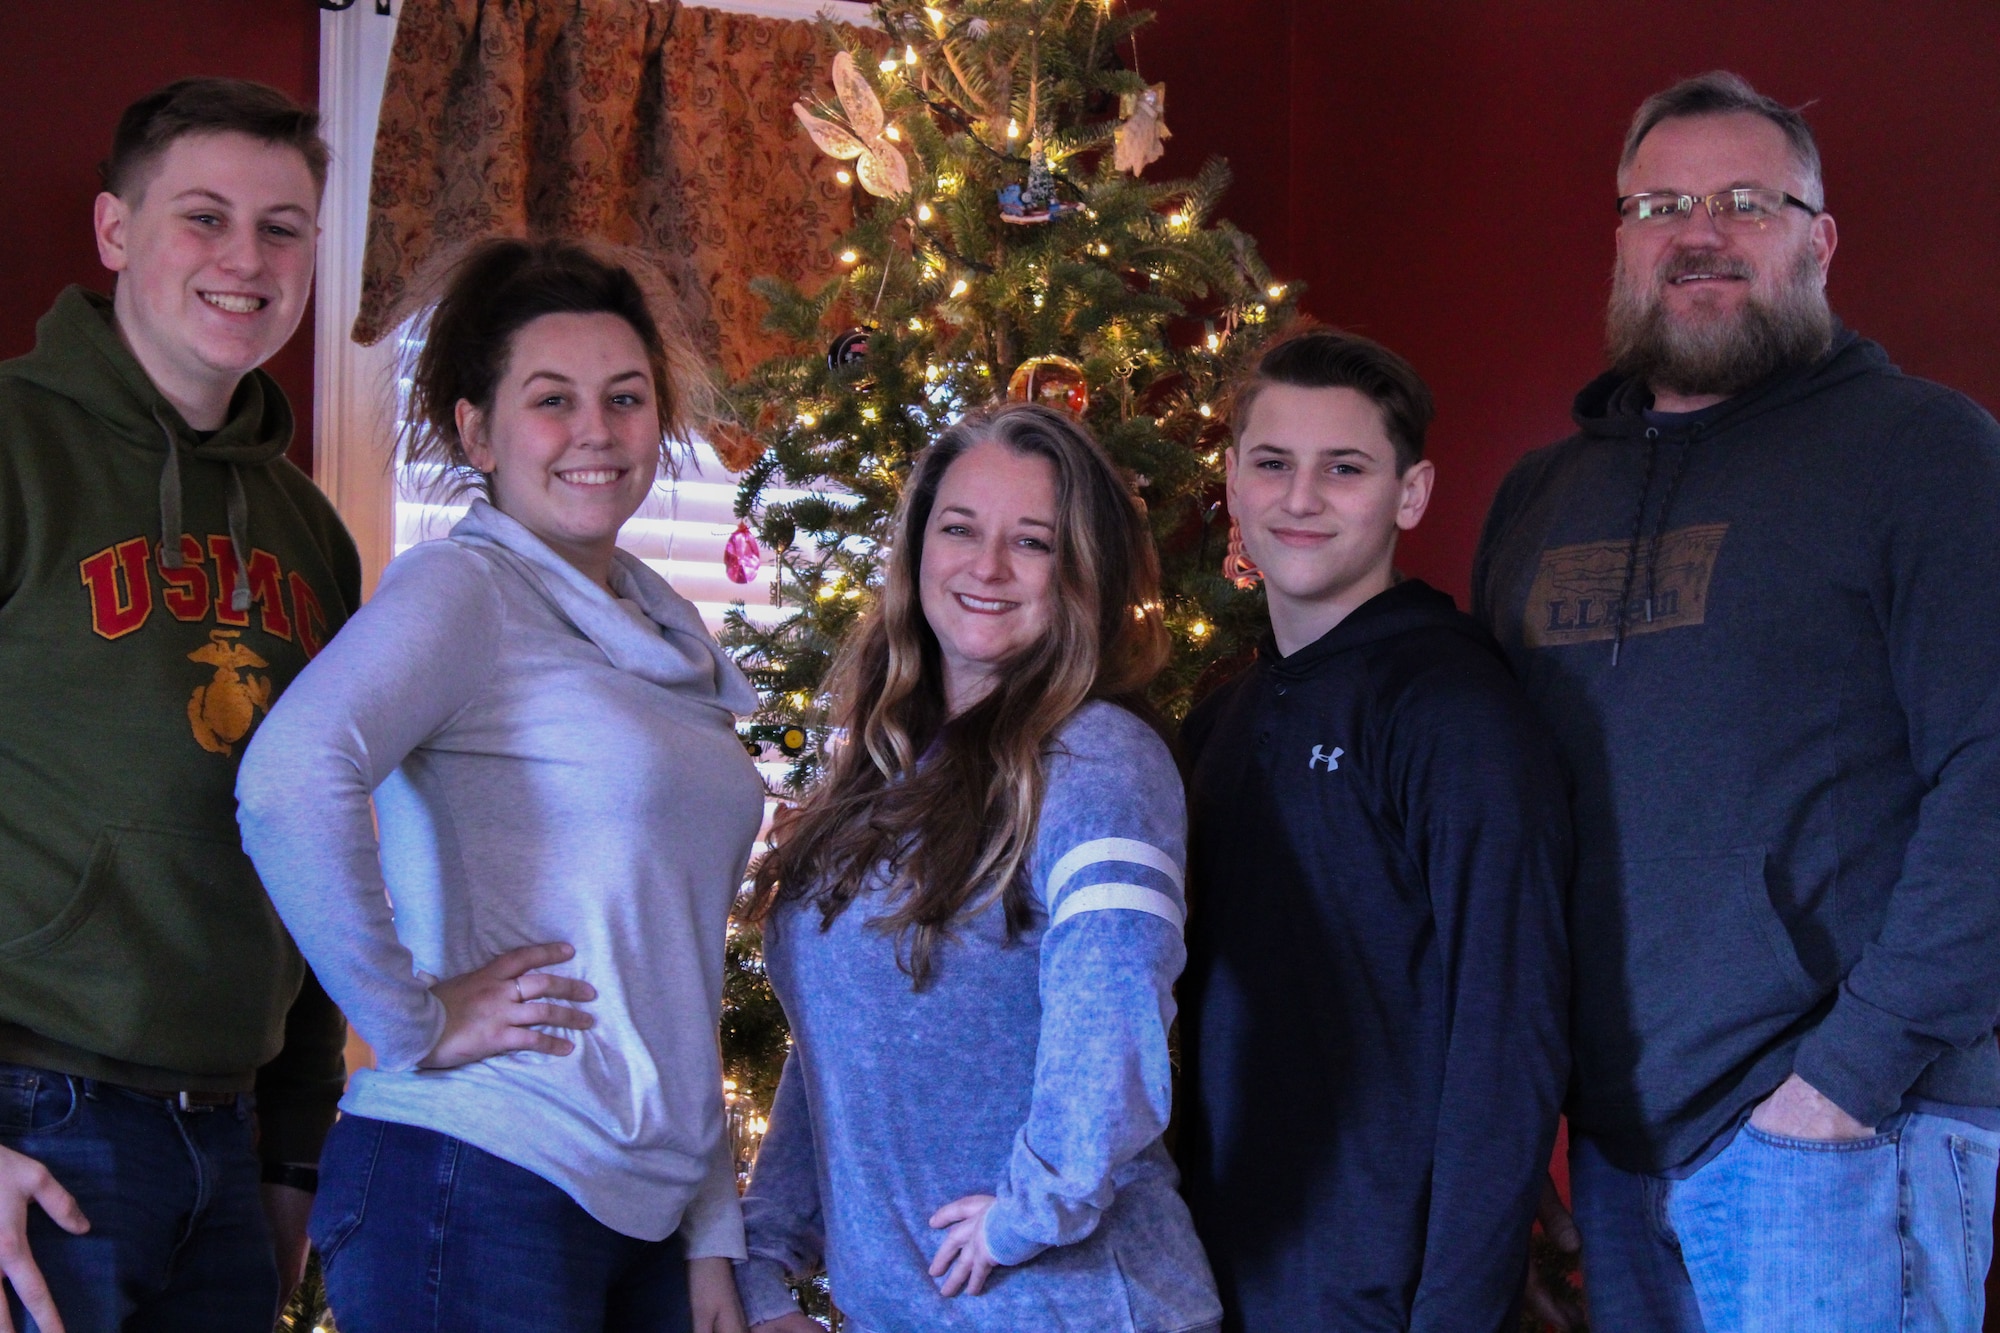 Shanes family photo during the holidays.